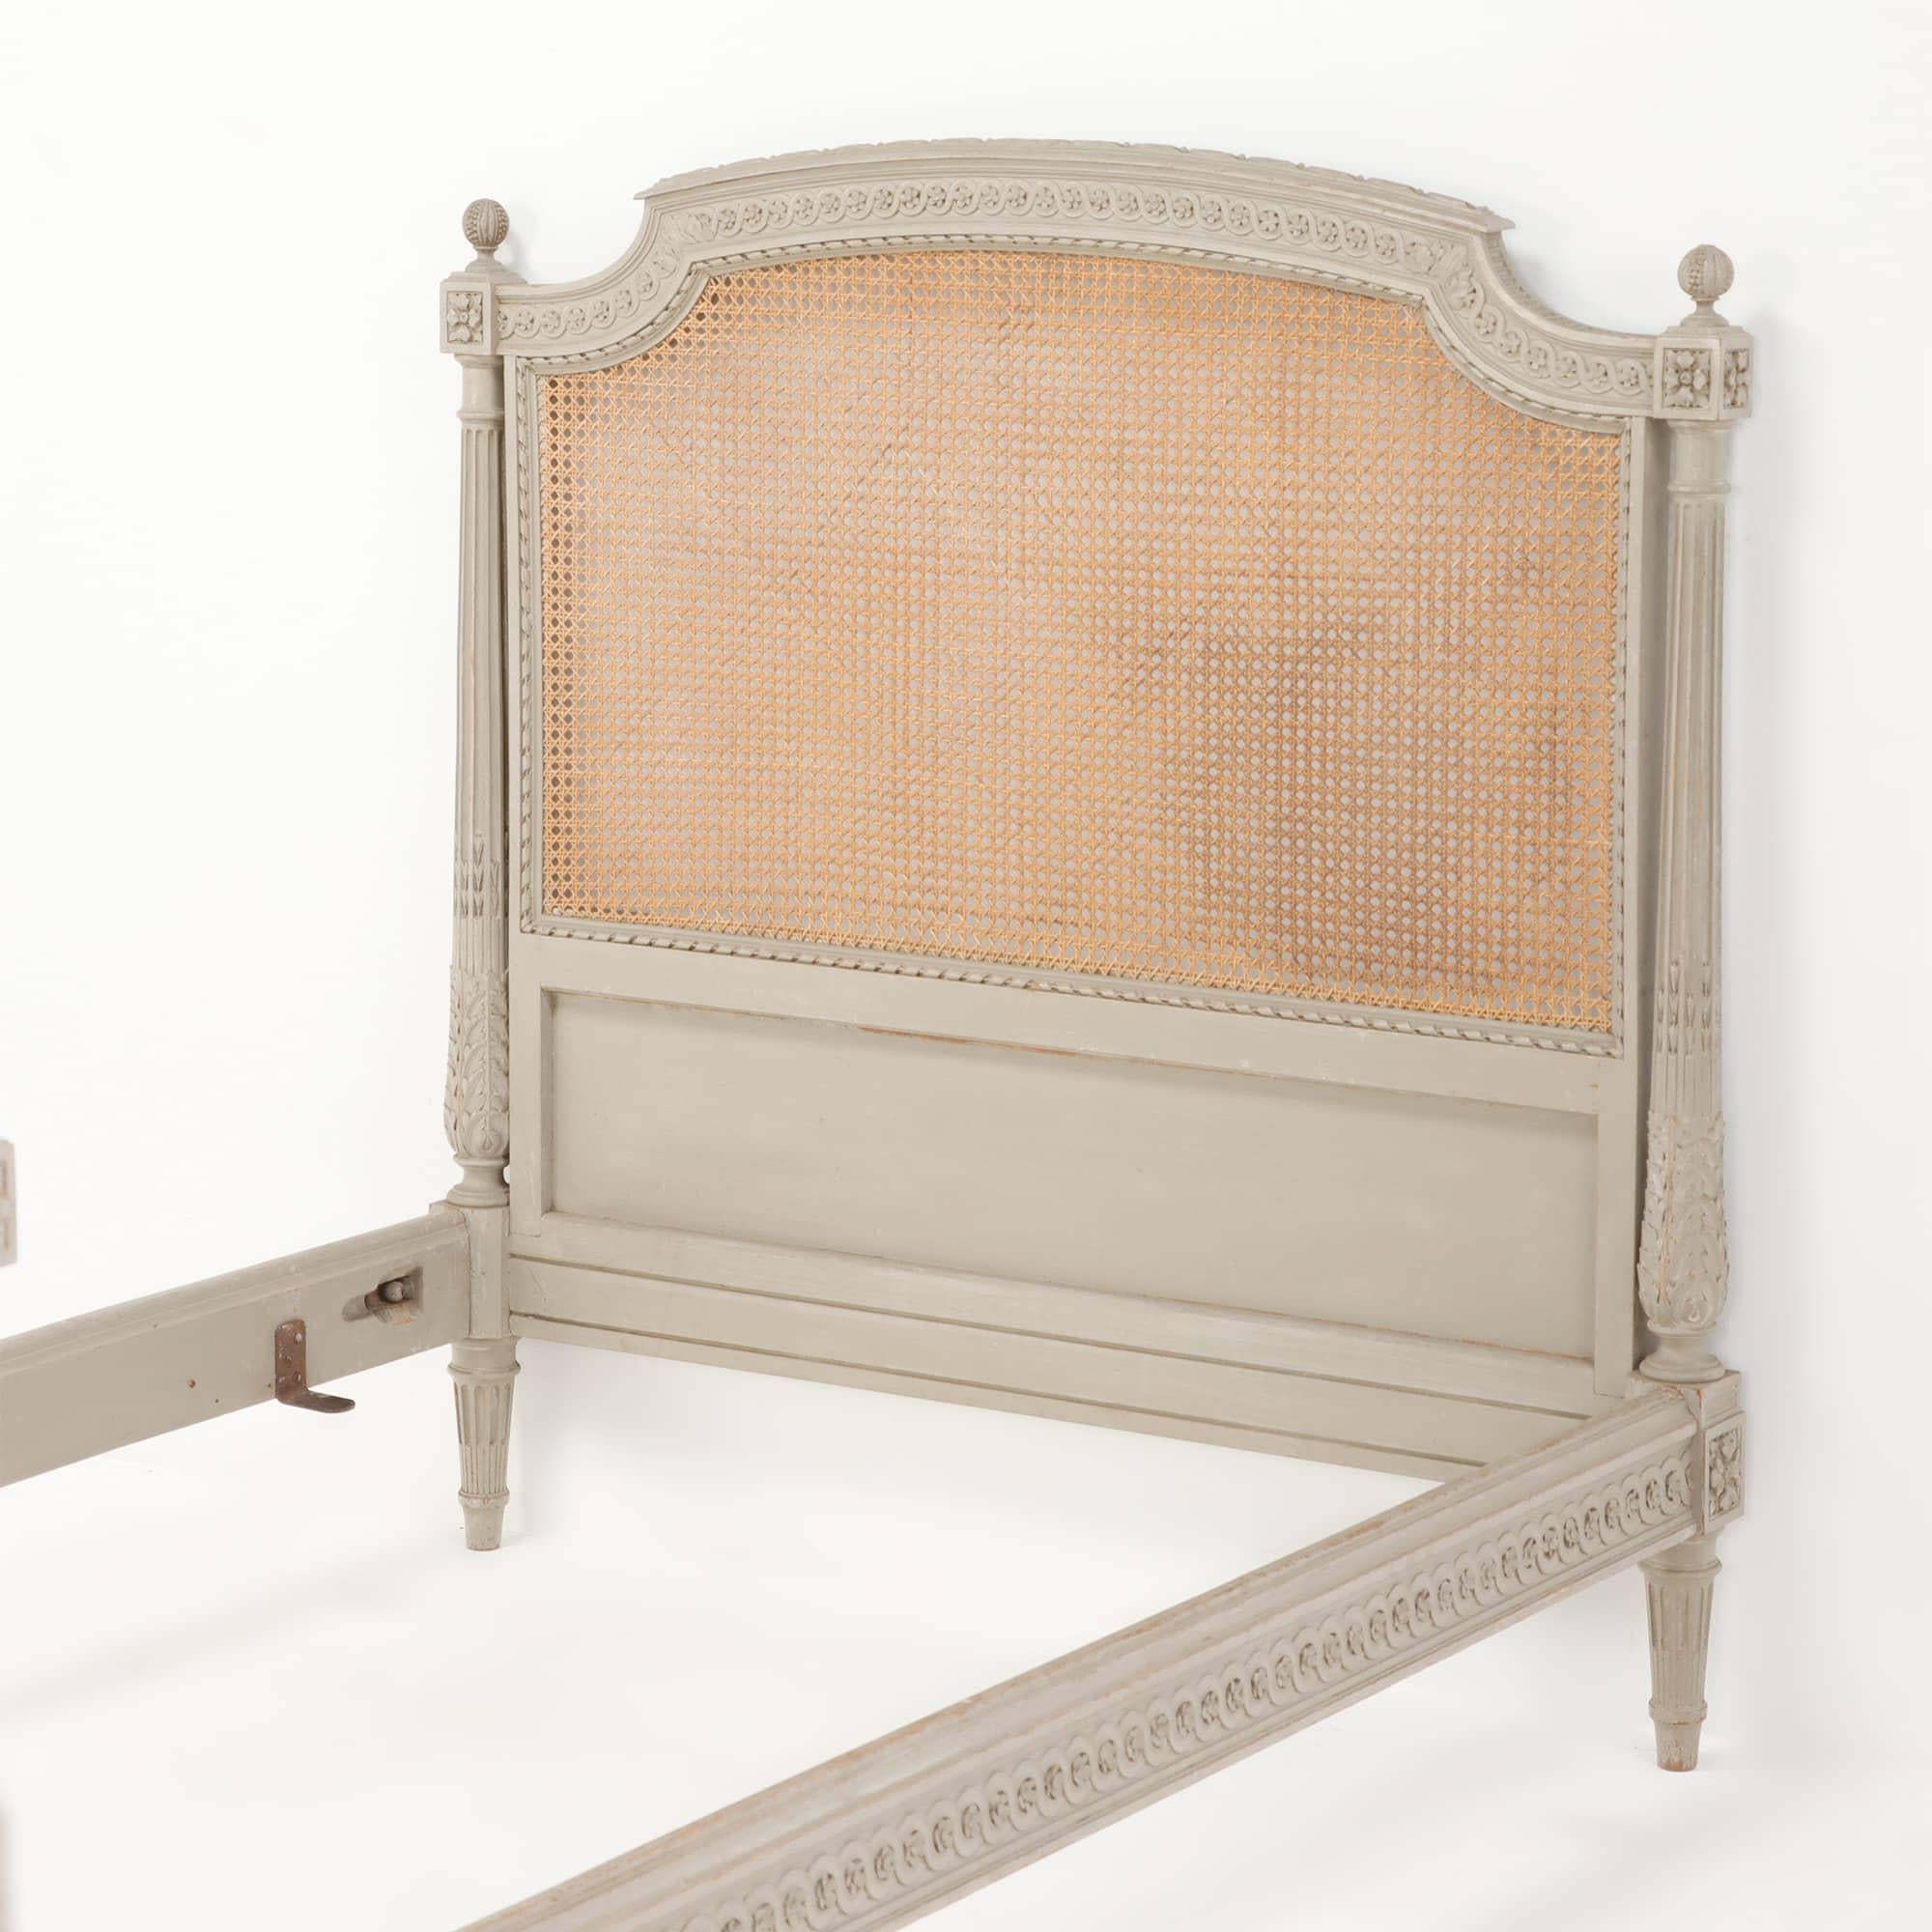 Carved Painted French Louis XVI style cane youth or twin size bed.